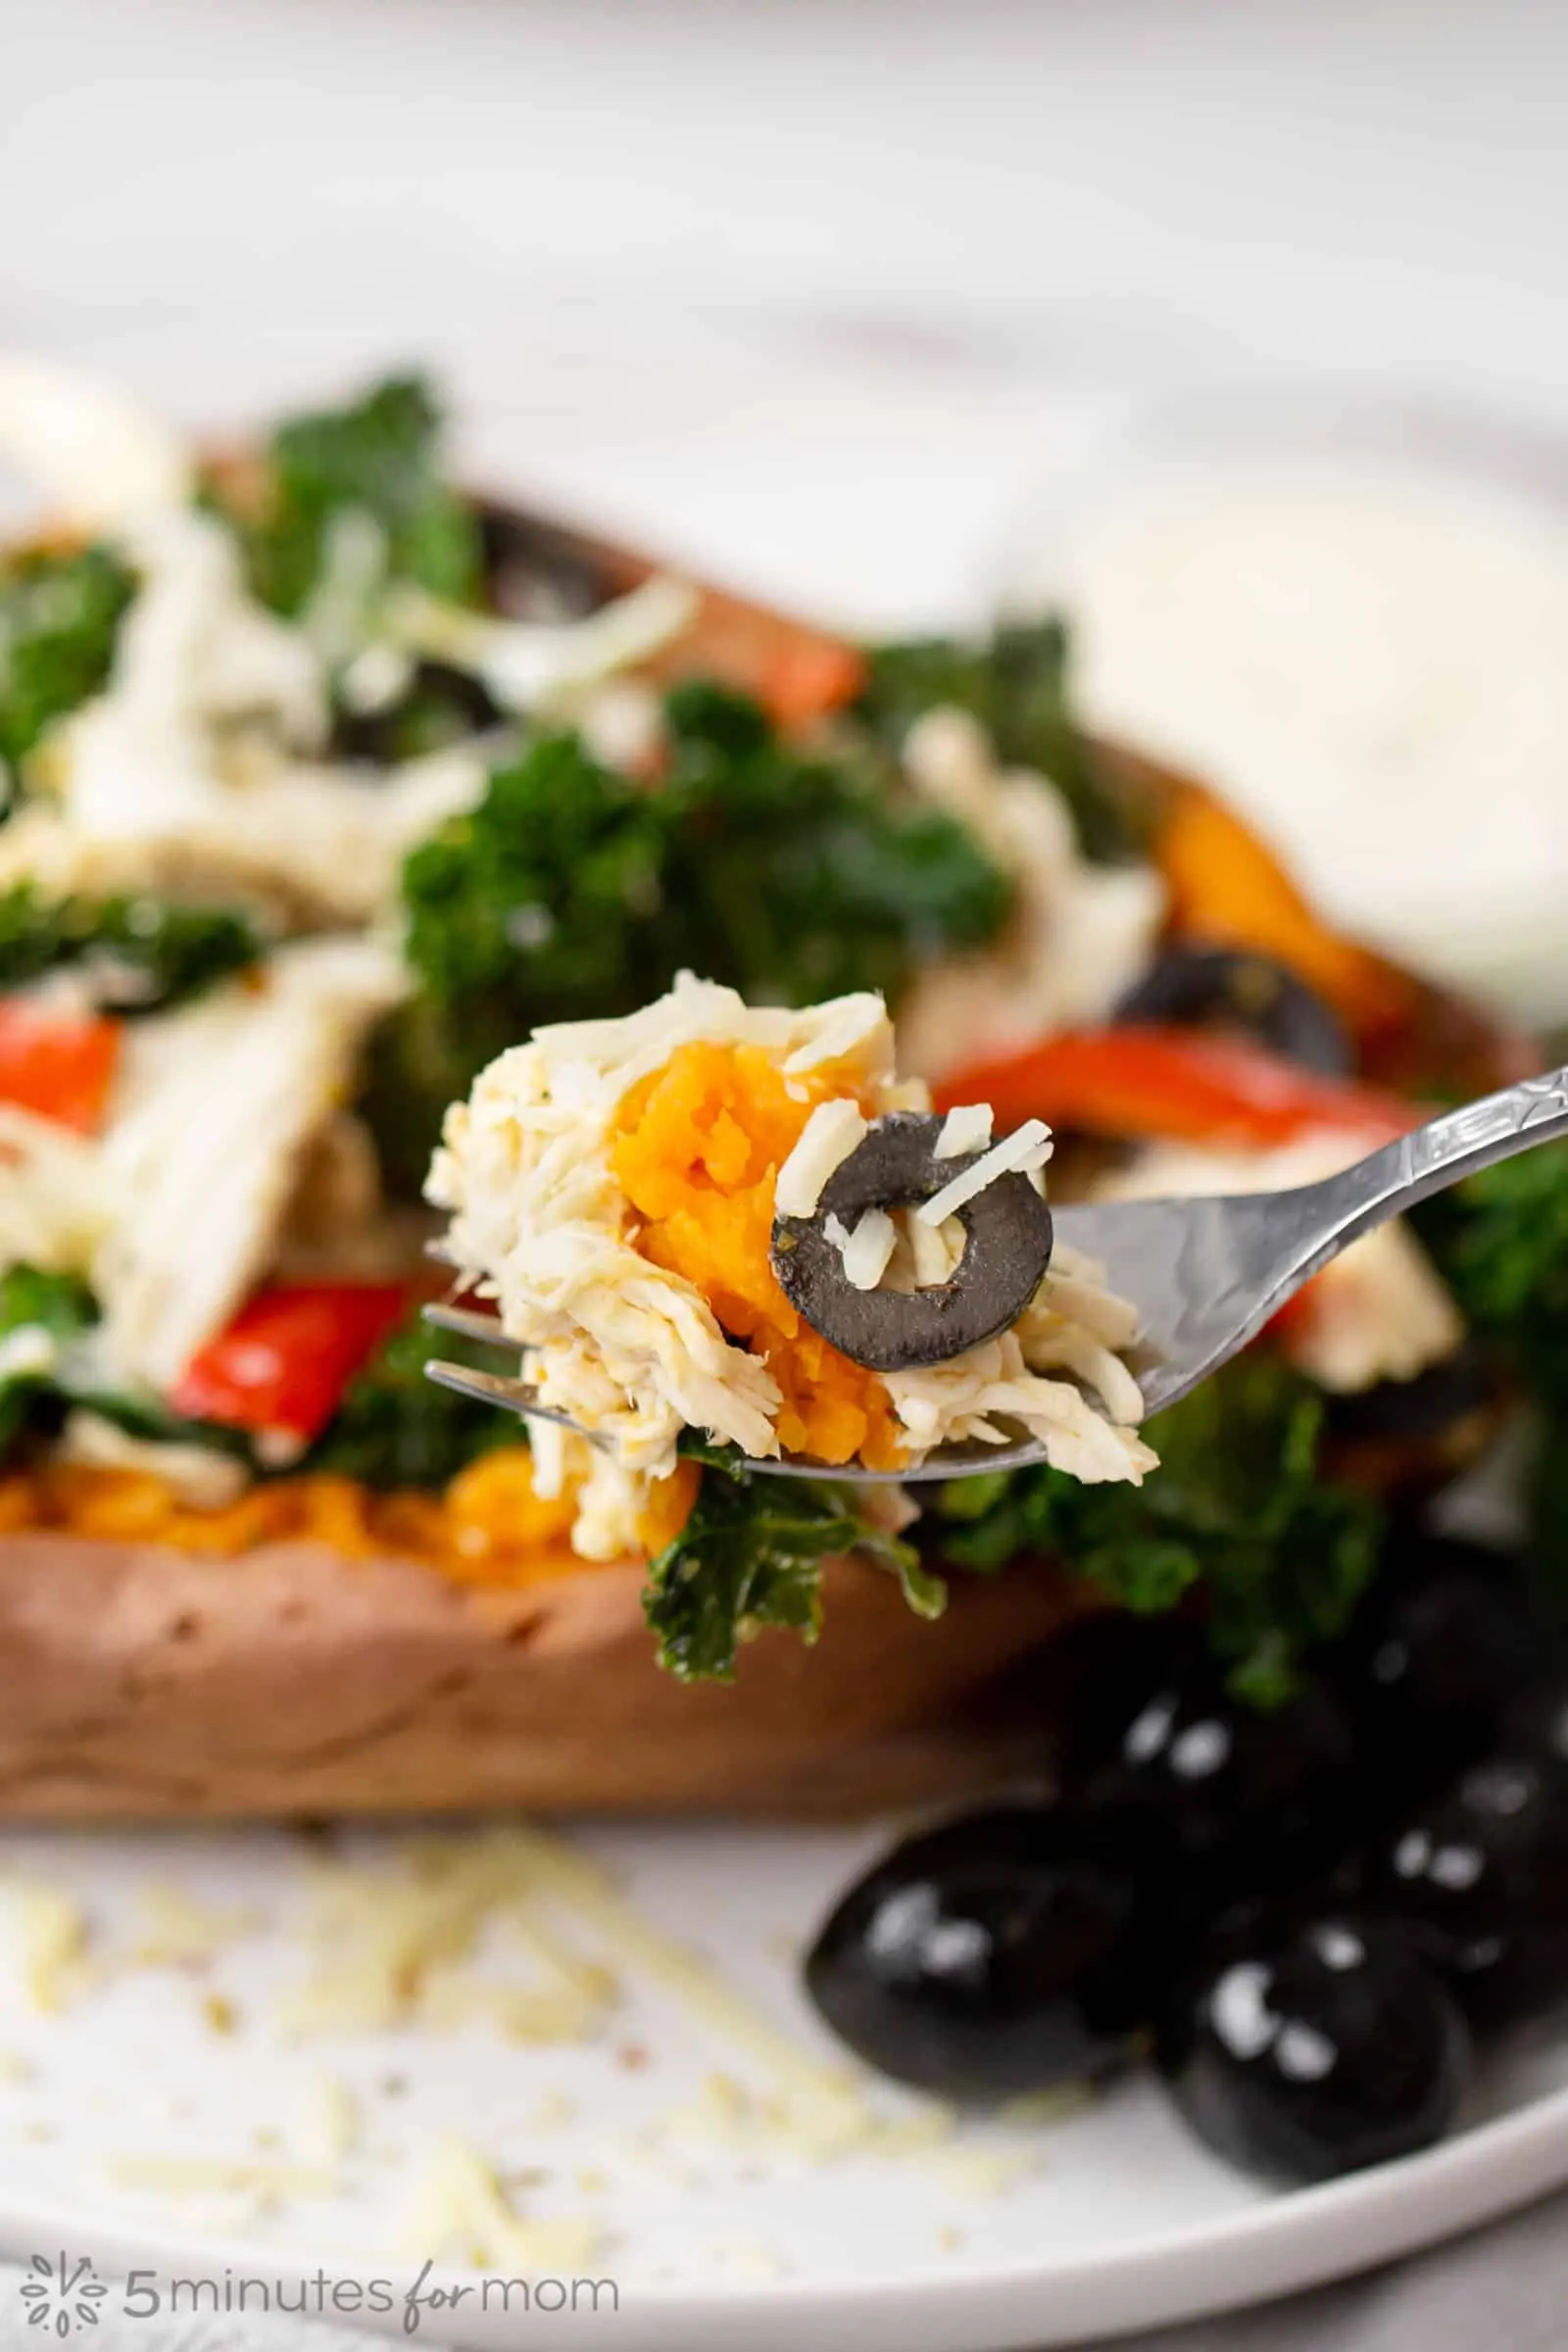 a forkful of stuffed sweet potatoes with shredded chicken and black olives